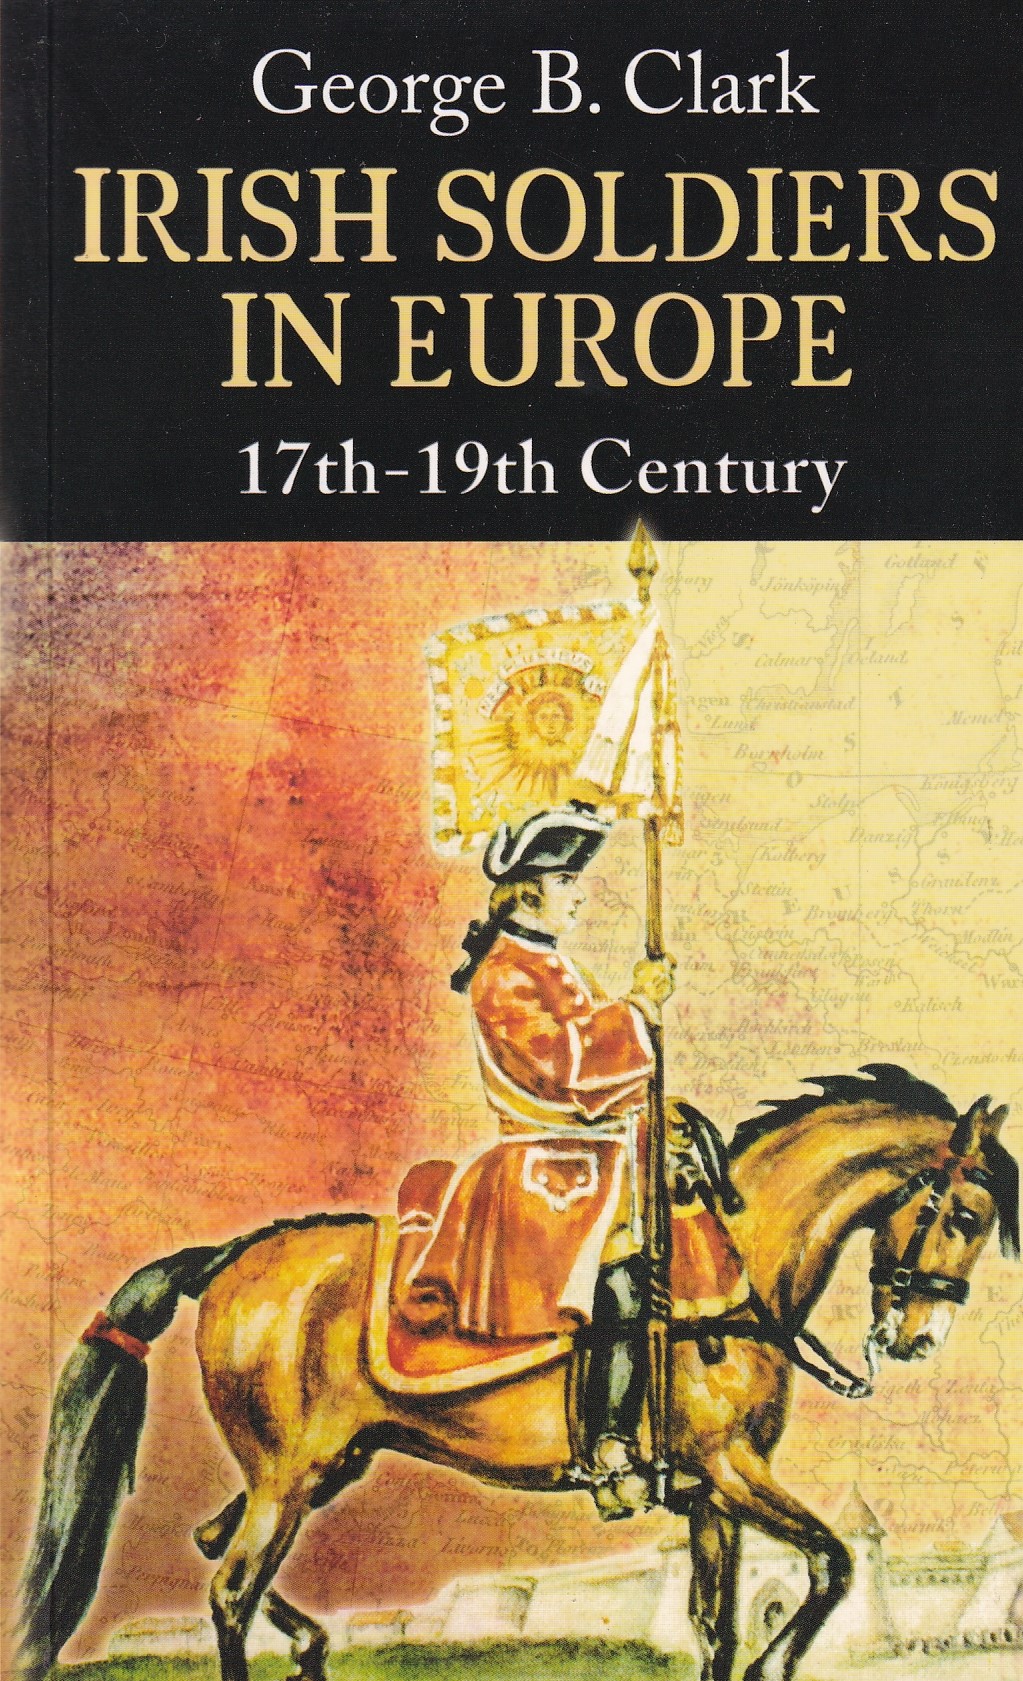 Irish Soldiers in Europe: 17th-19th Century by George B. Clark